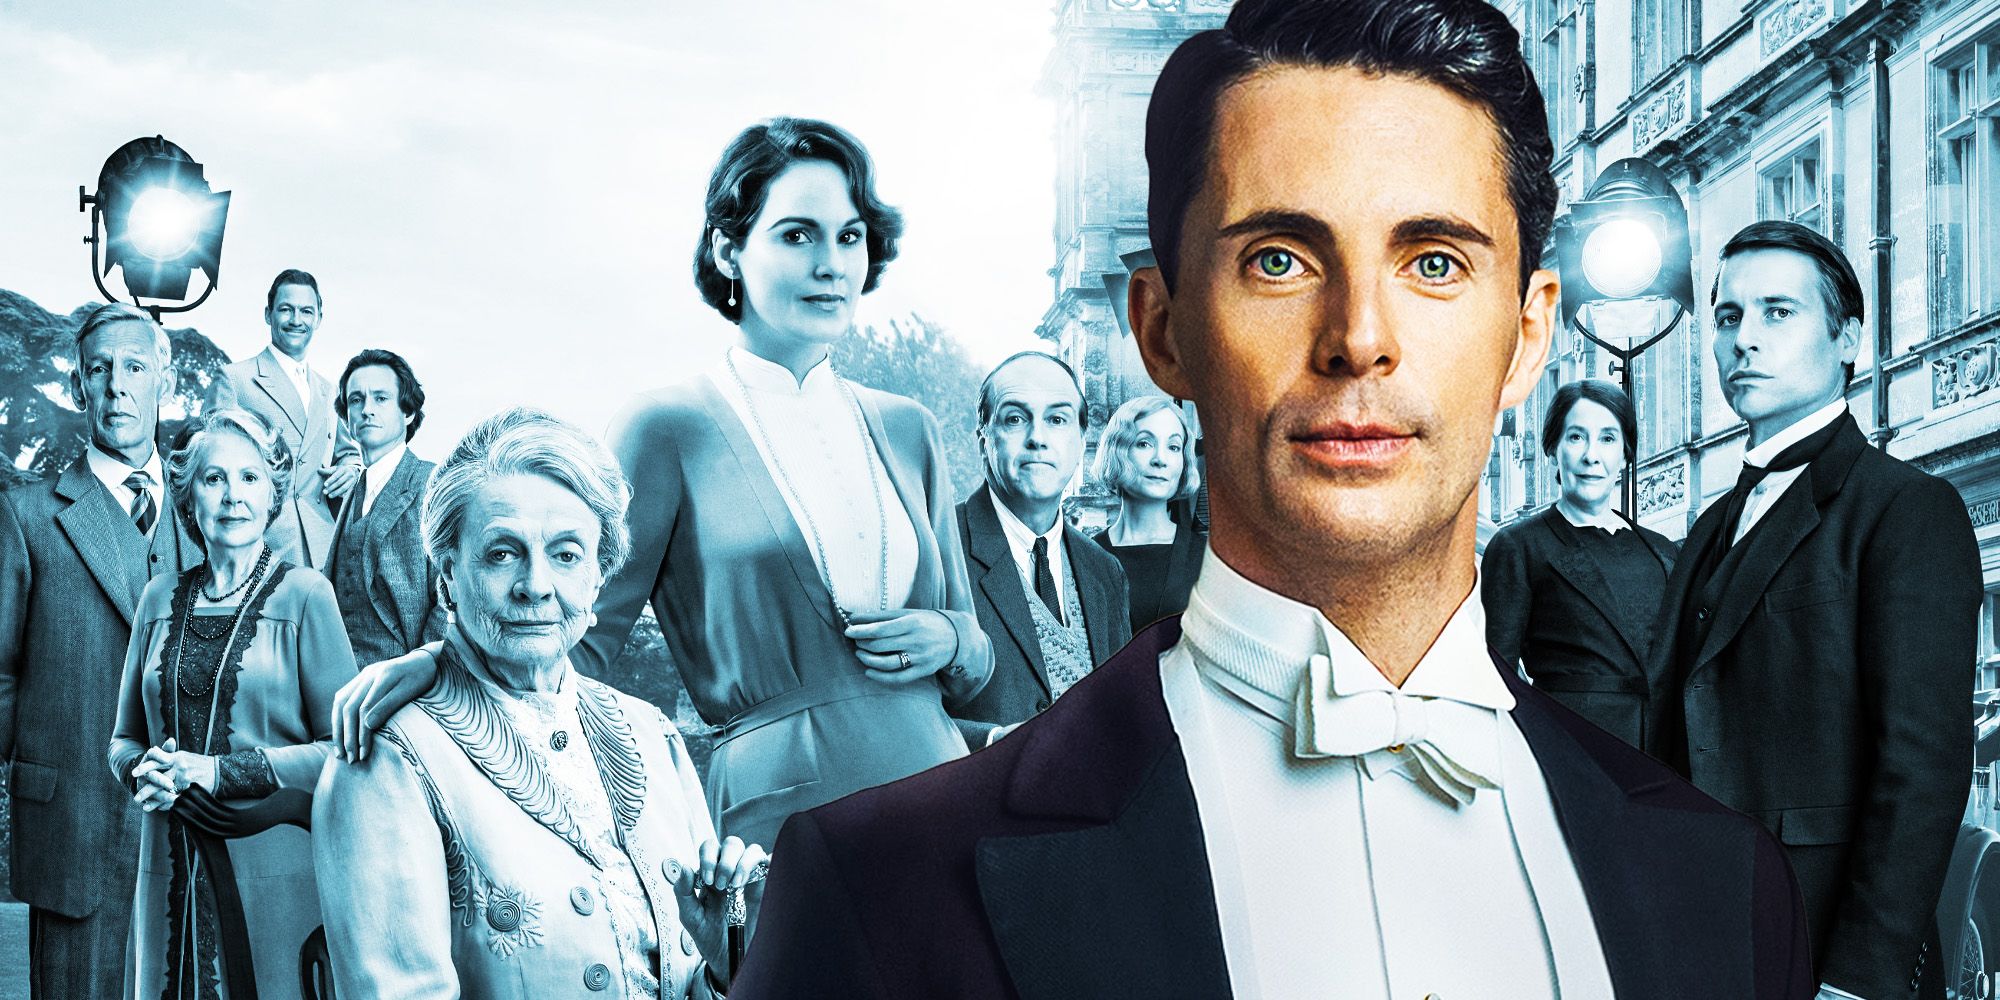 Why matthew Goode is not in downton abbey a new era